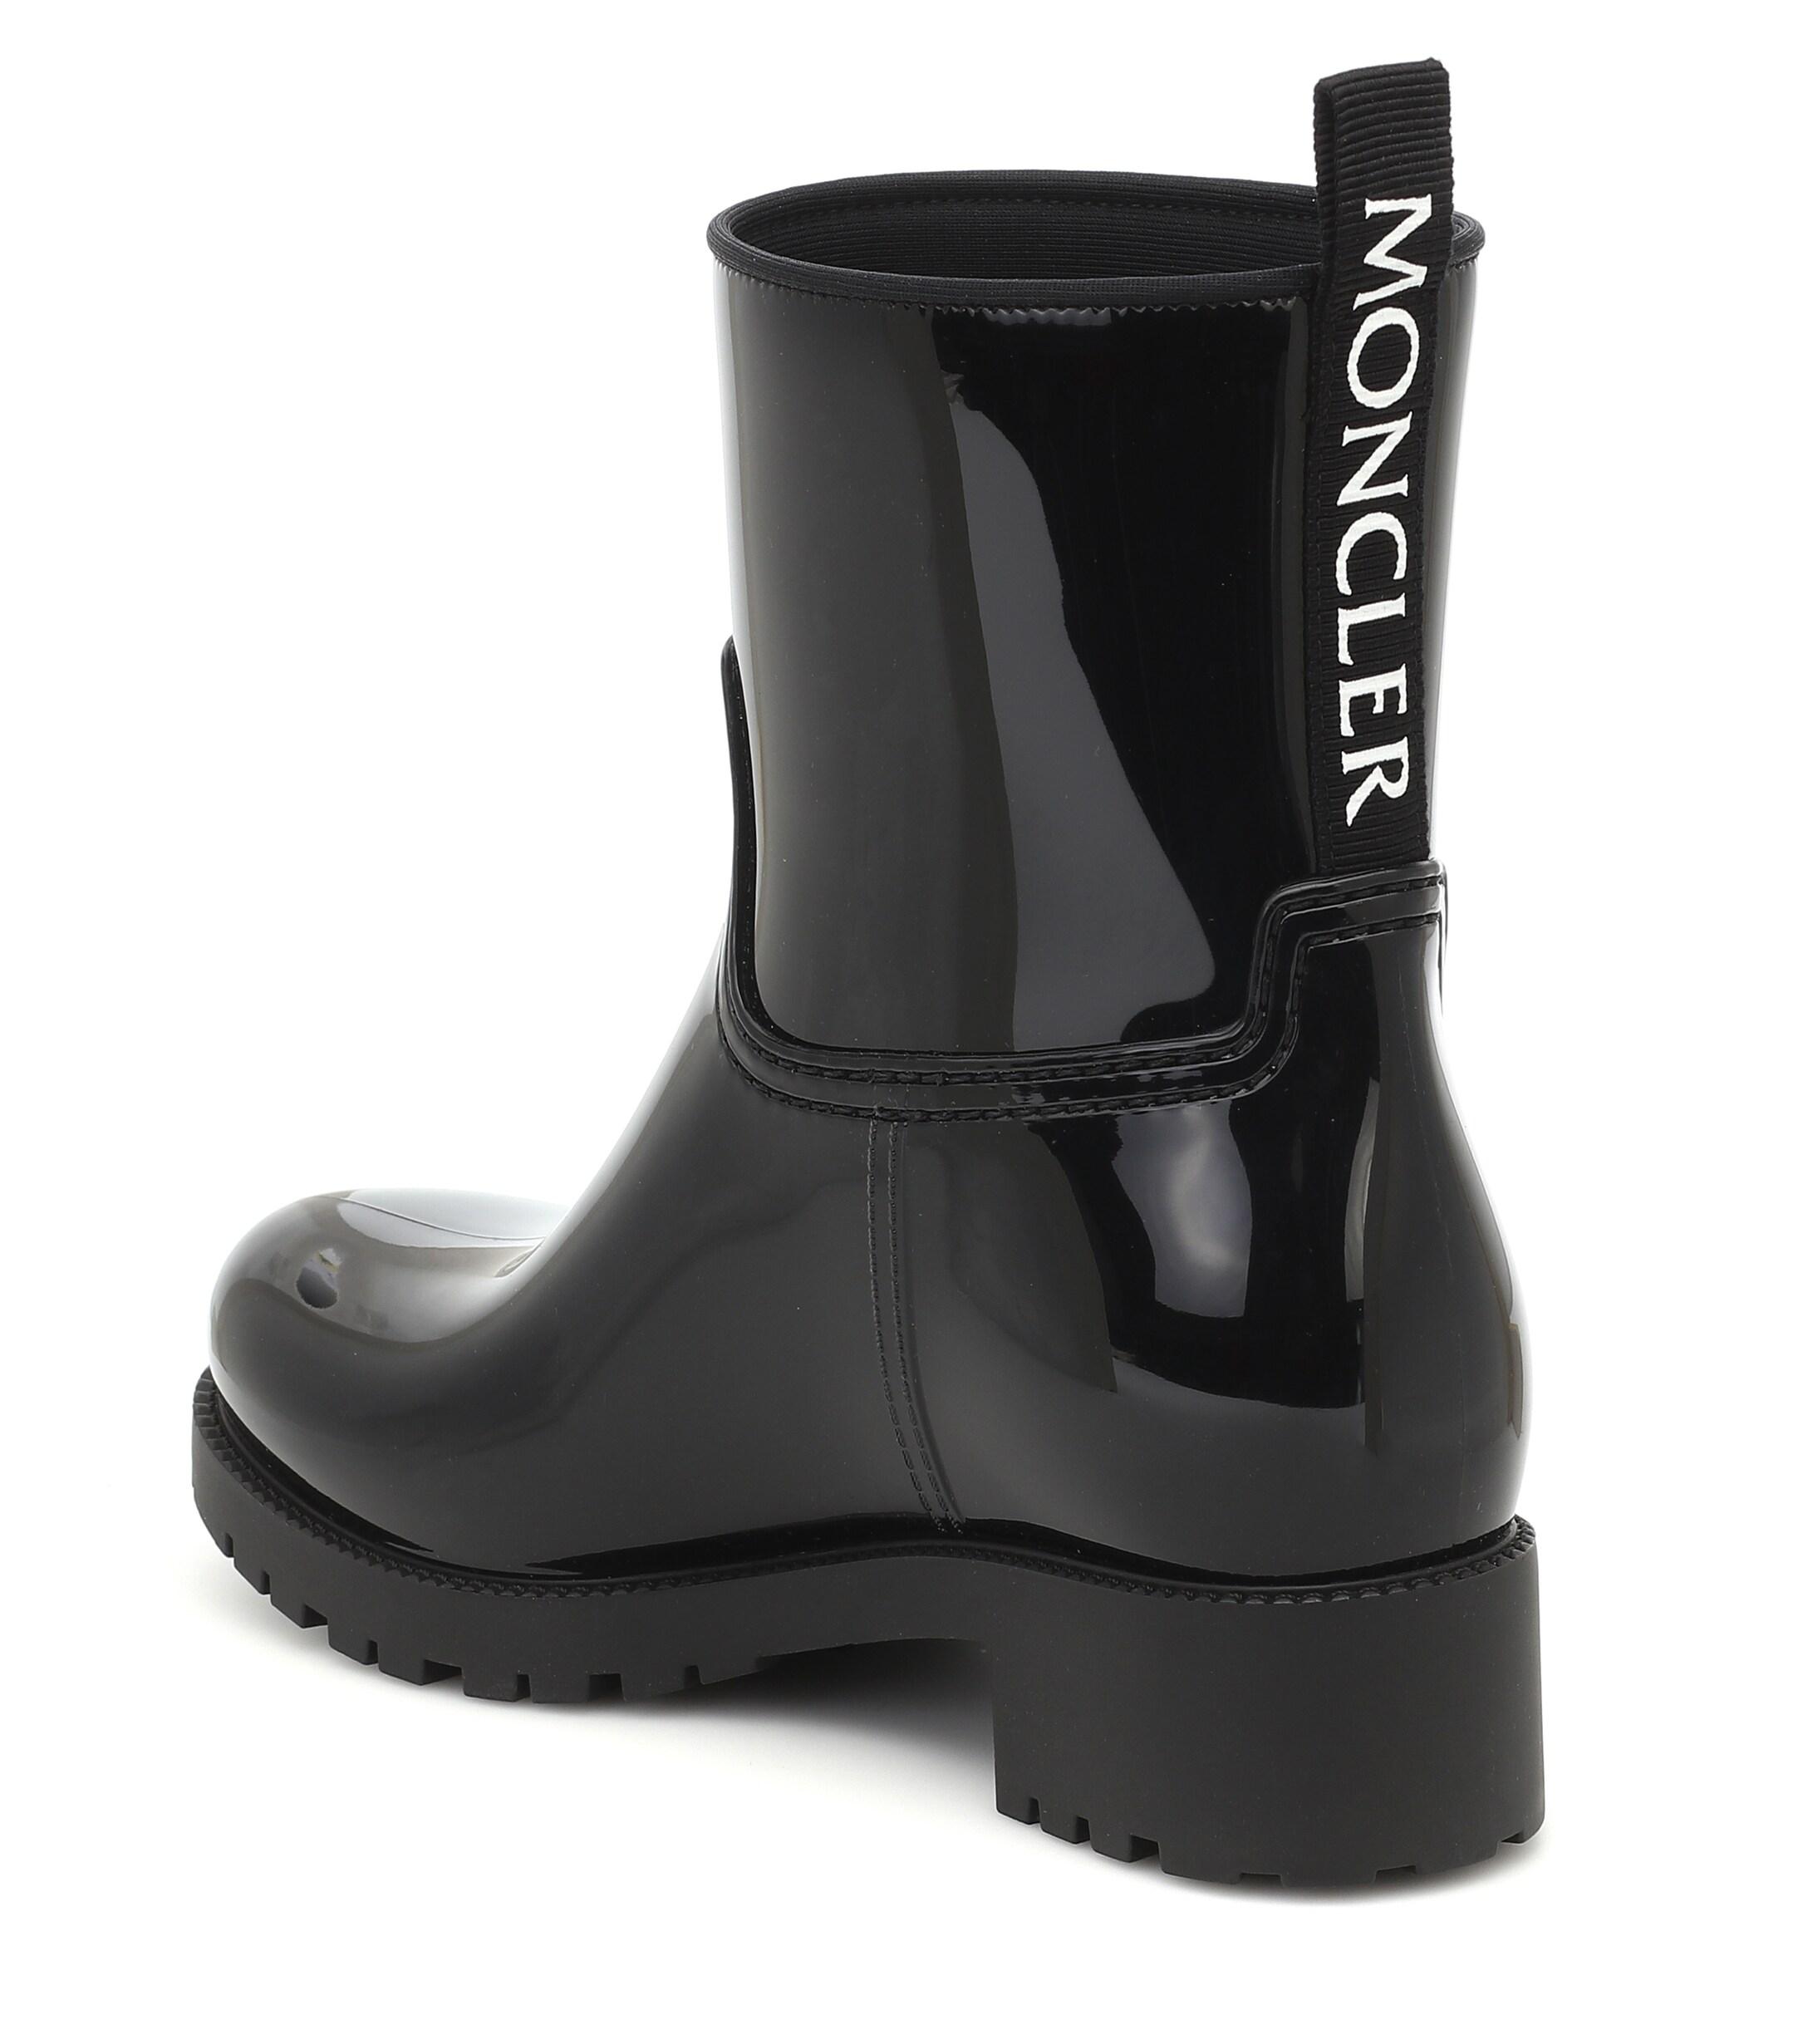 Moncler Ginette Stivale Rain Boots in Black - Lyst